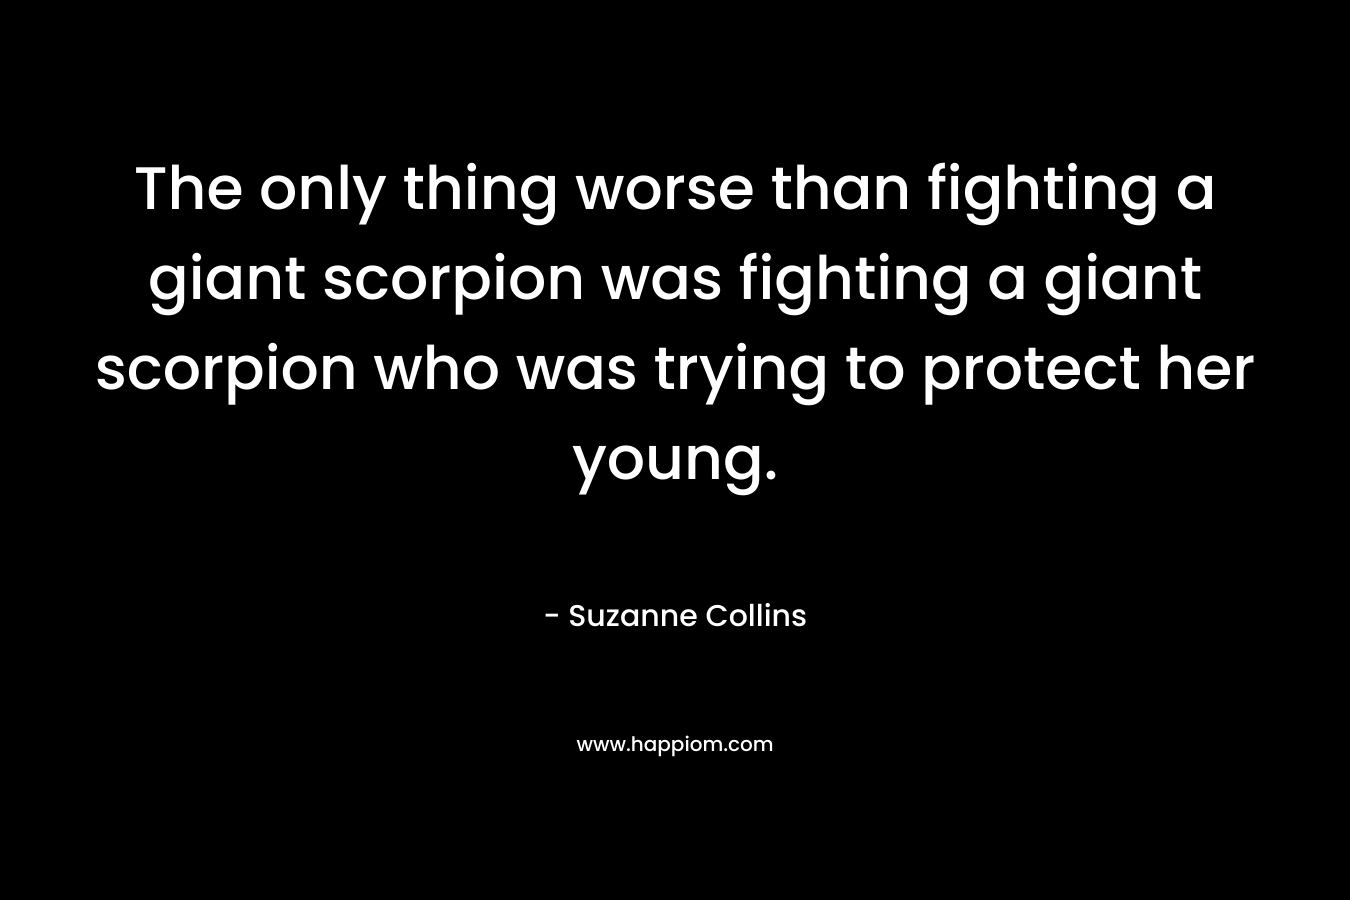 The only thing worse than fighting a giant scorpion was fighting a giant scorpion who was trying to protect her young.